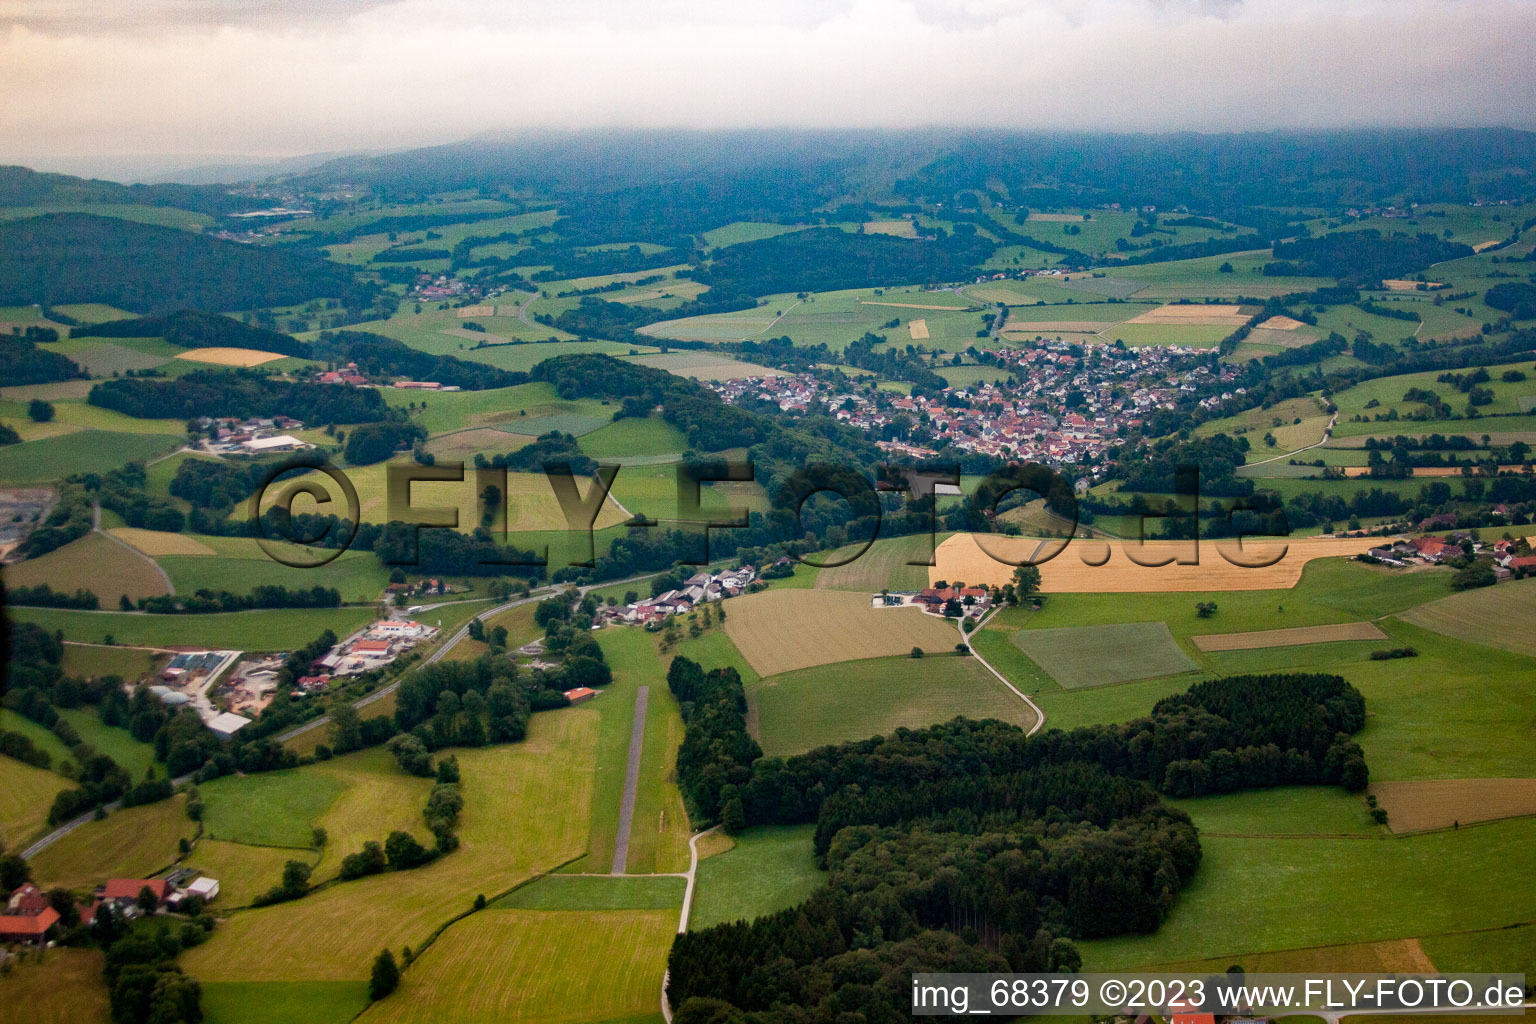 Glider airfield in Remerz in the state Hesse, Germany